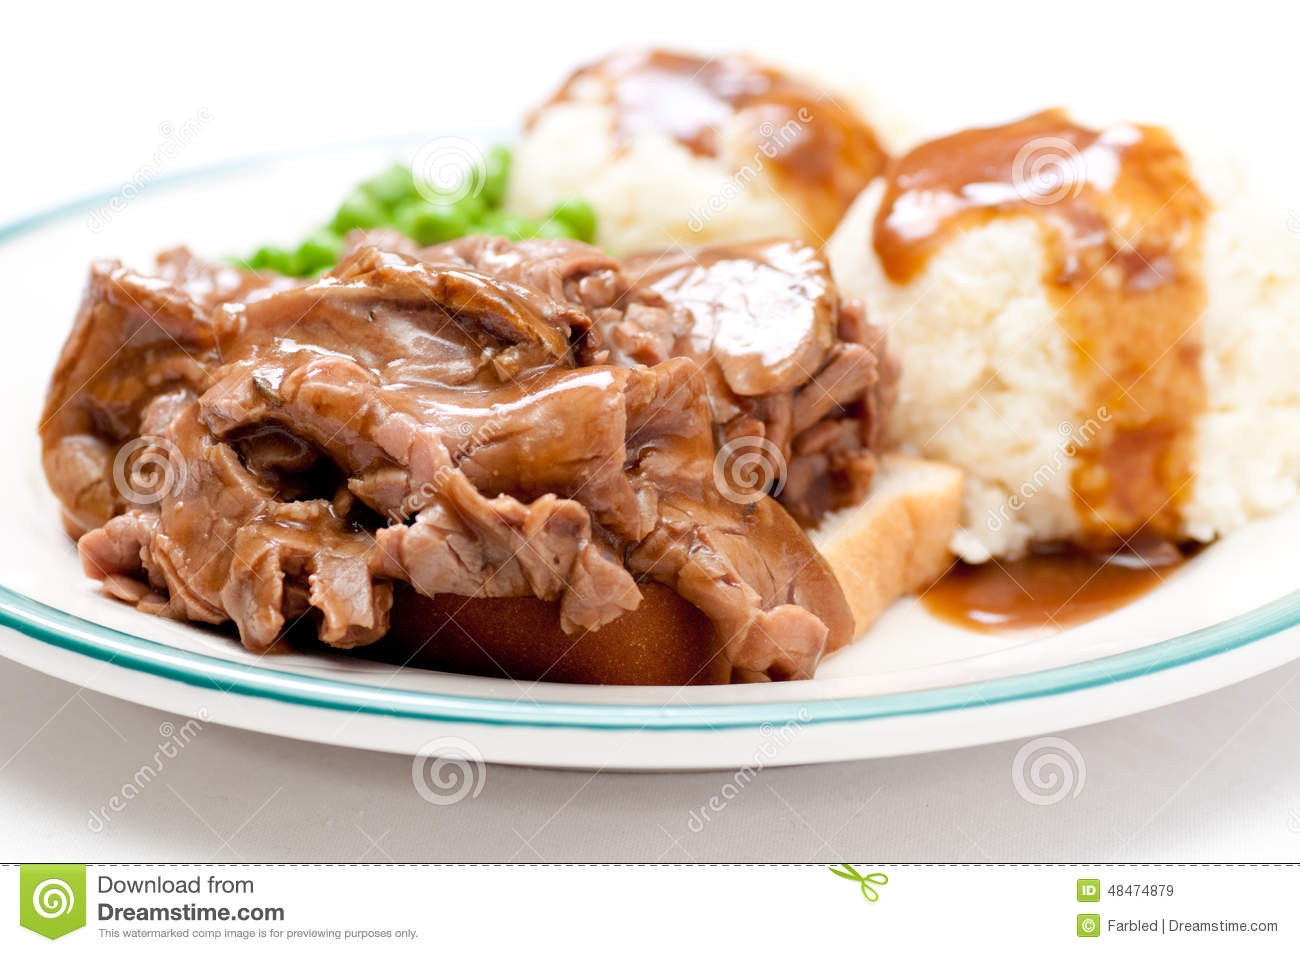 Open Faced Roast Beef Sandwich With Gravy
 Diner Style Hot Beef Sandwich Stock Image Image of